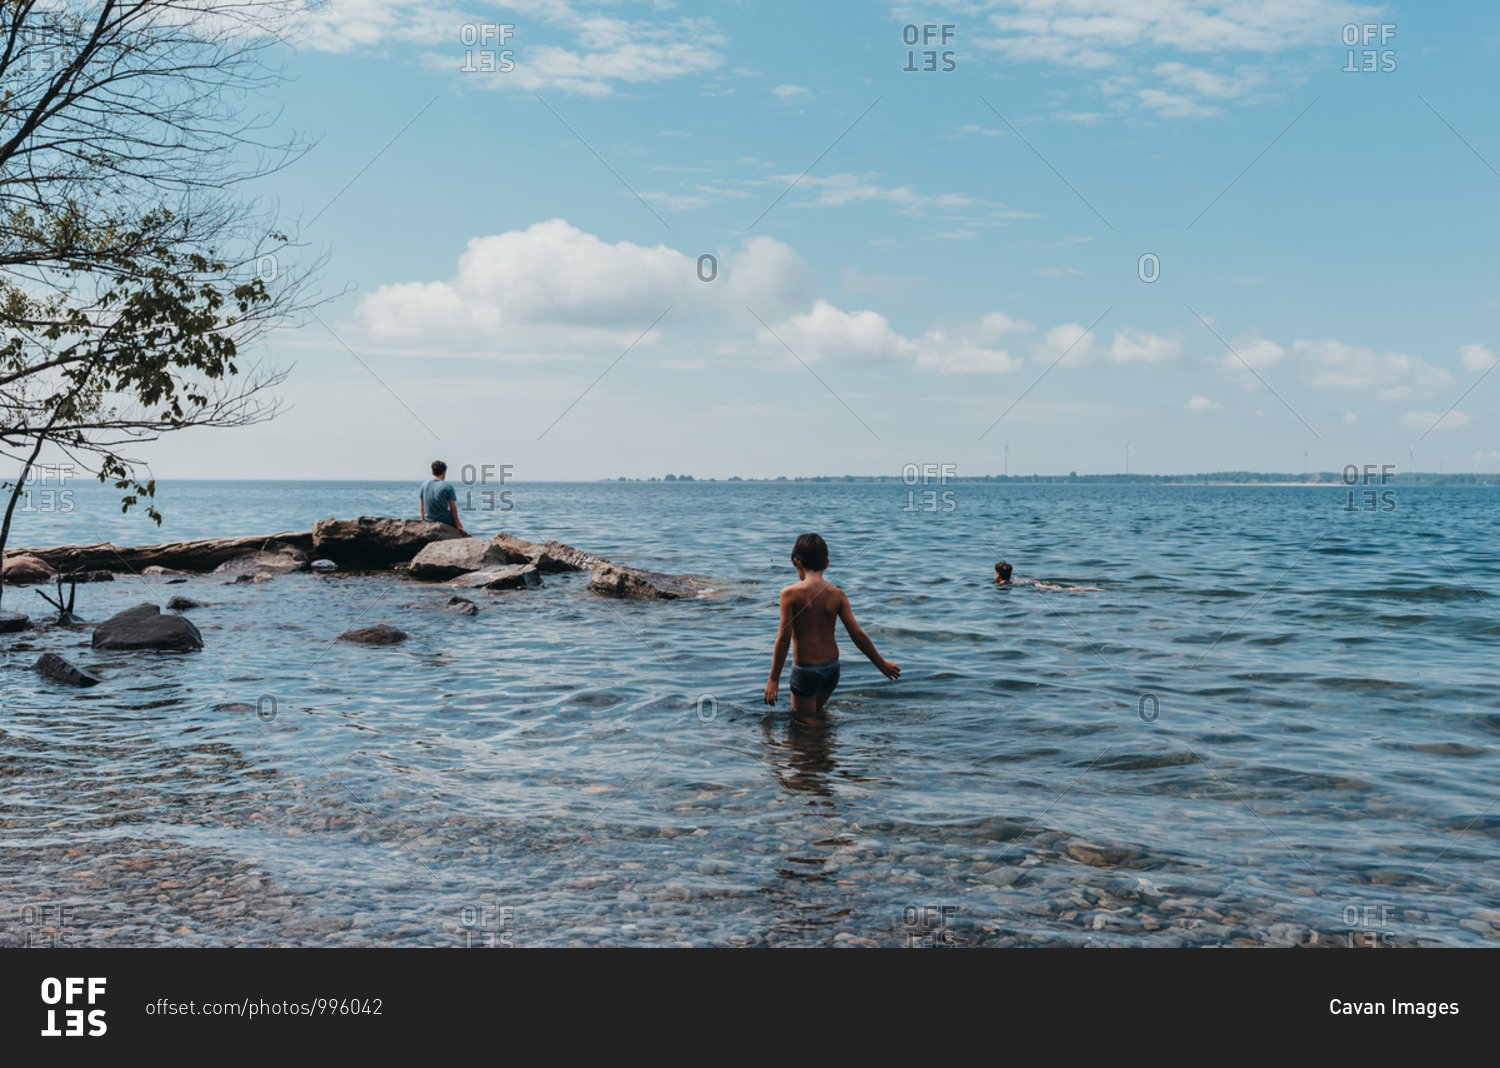 Children wading and swimming in lake ontario on a hot summer day.